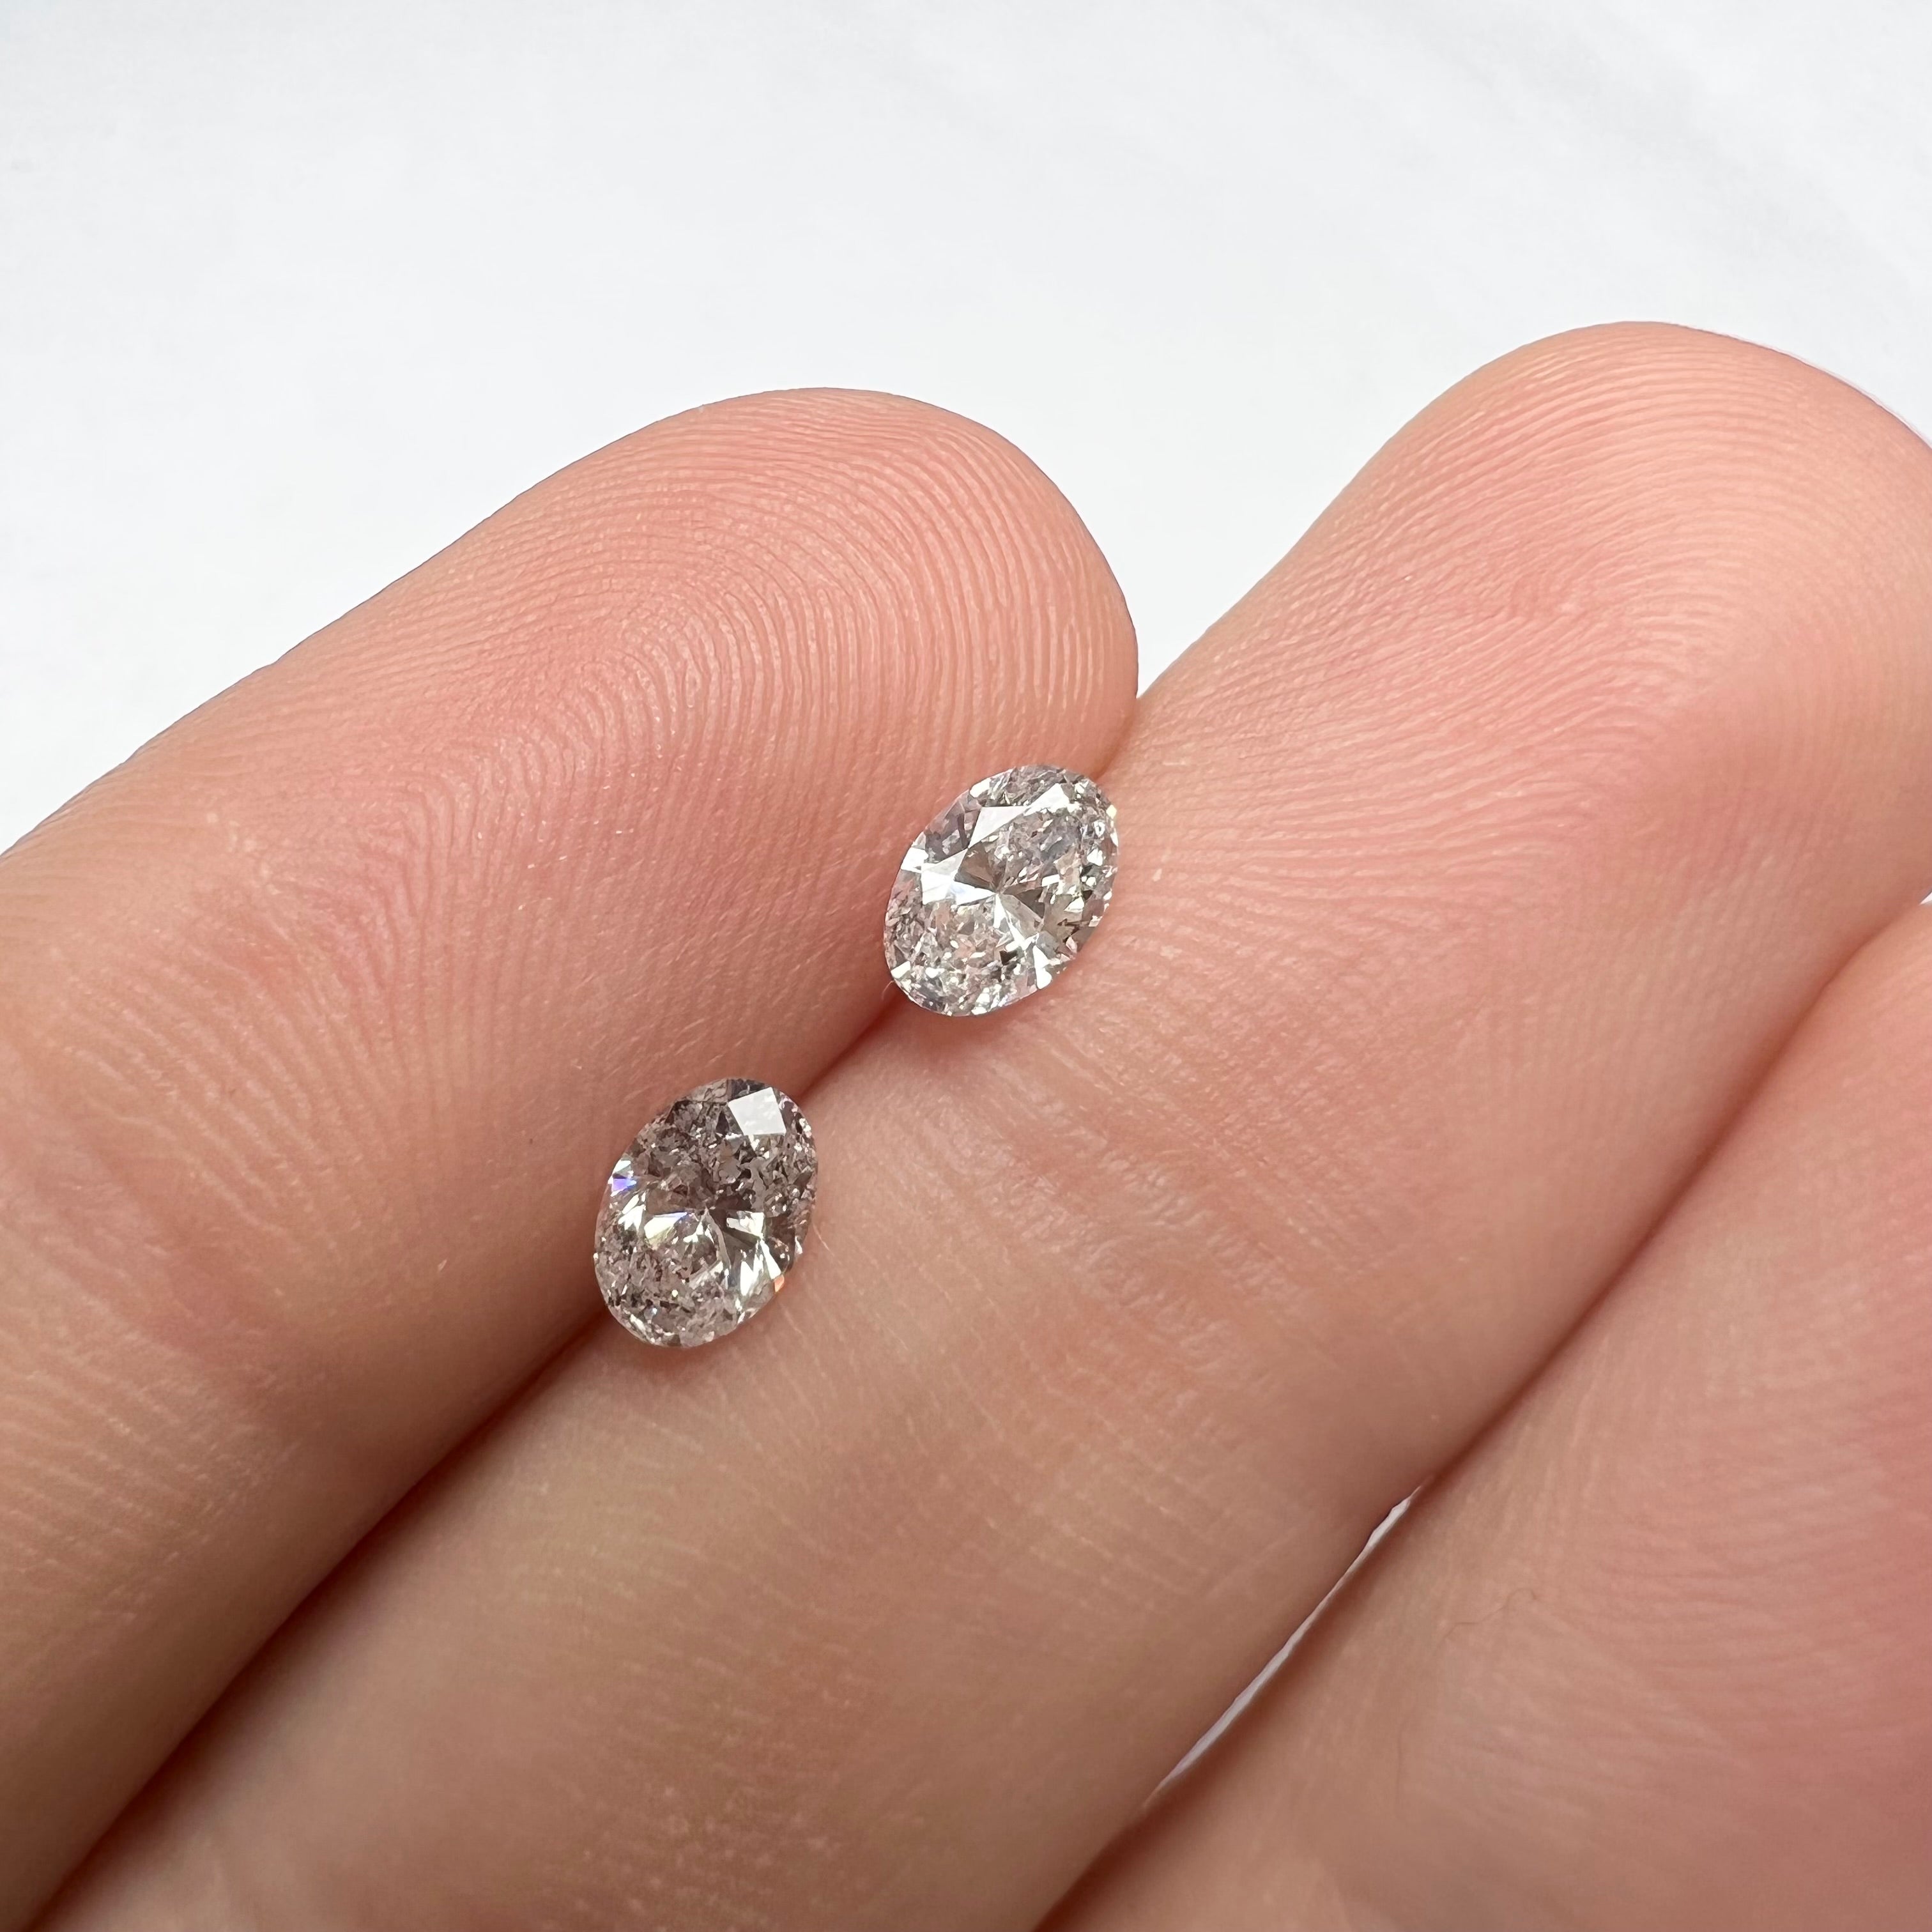 .76CTW Pair of Natural Oval Cut Diamonds I1 H-J Natural and Earth mined